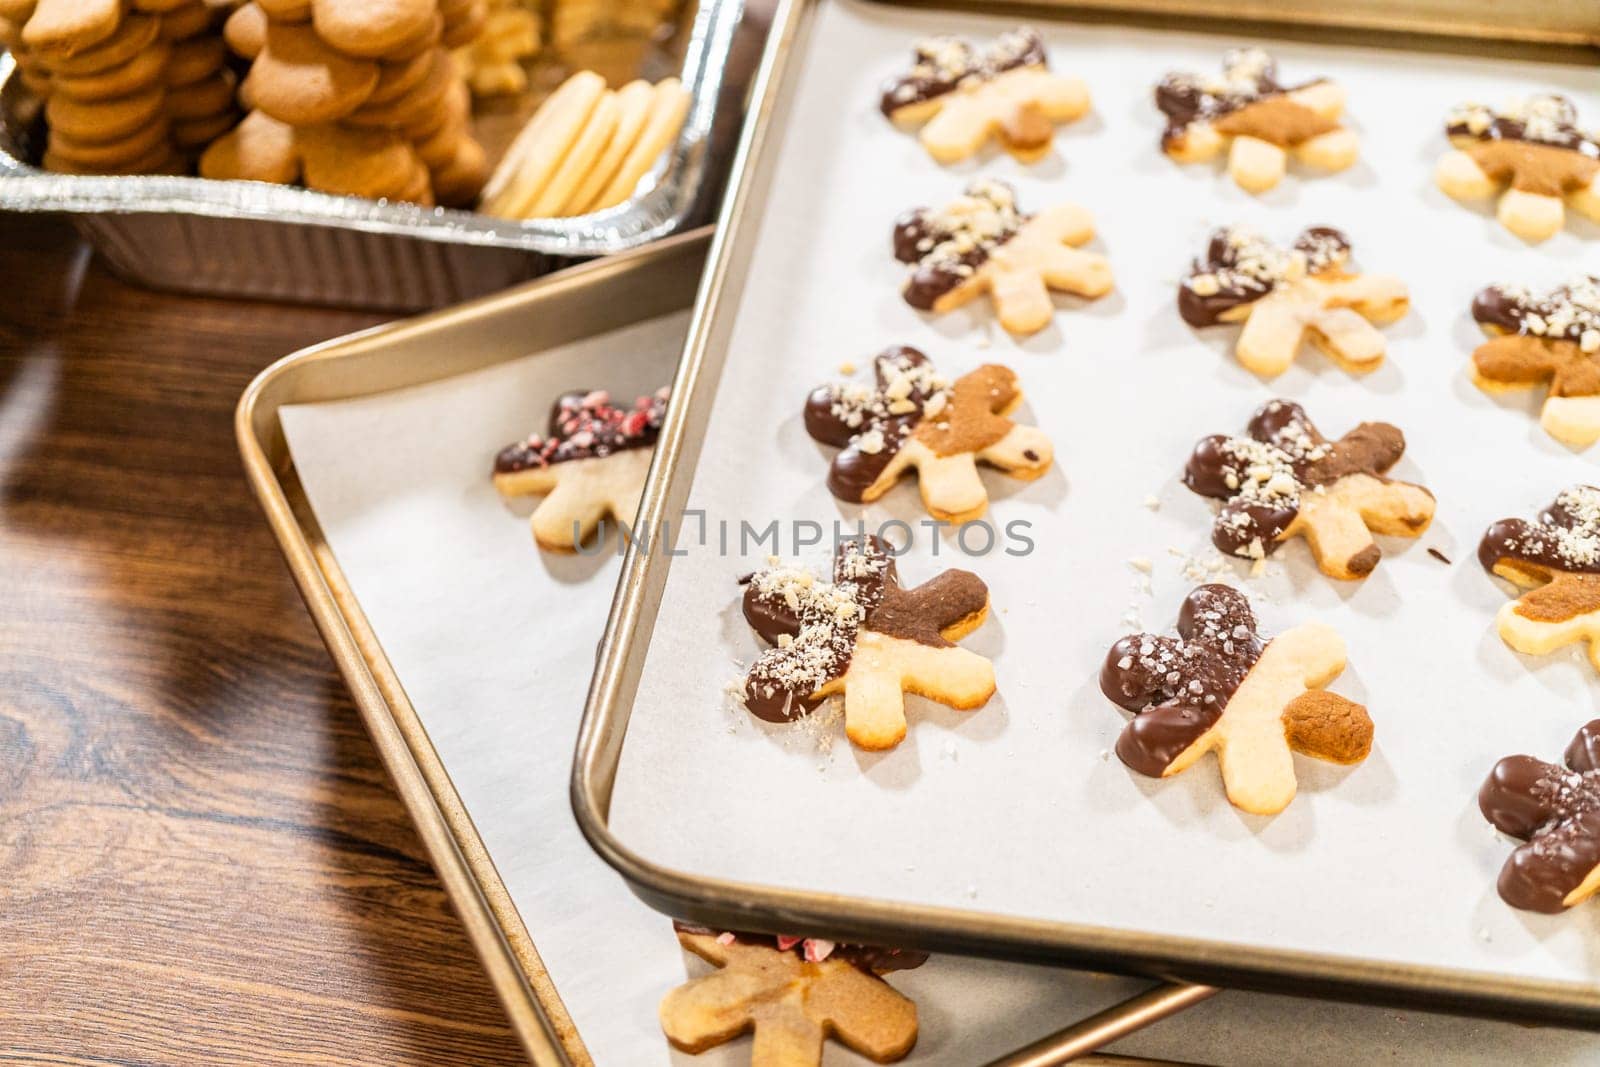 Creating cutout sugar cookies, partially dipped in chocolate and topped with hazelnut pieces, placed on parchment paper.